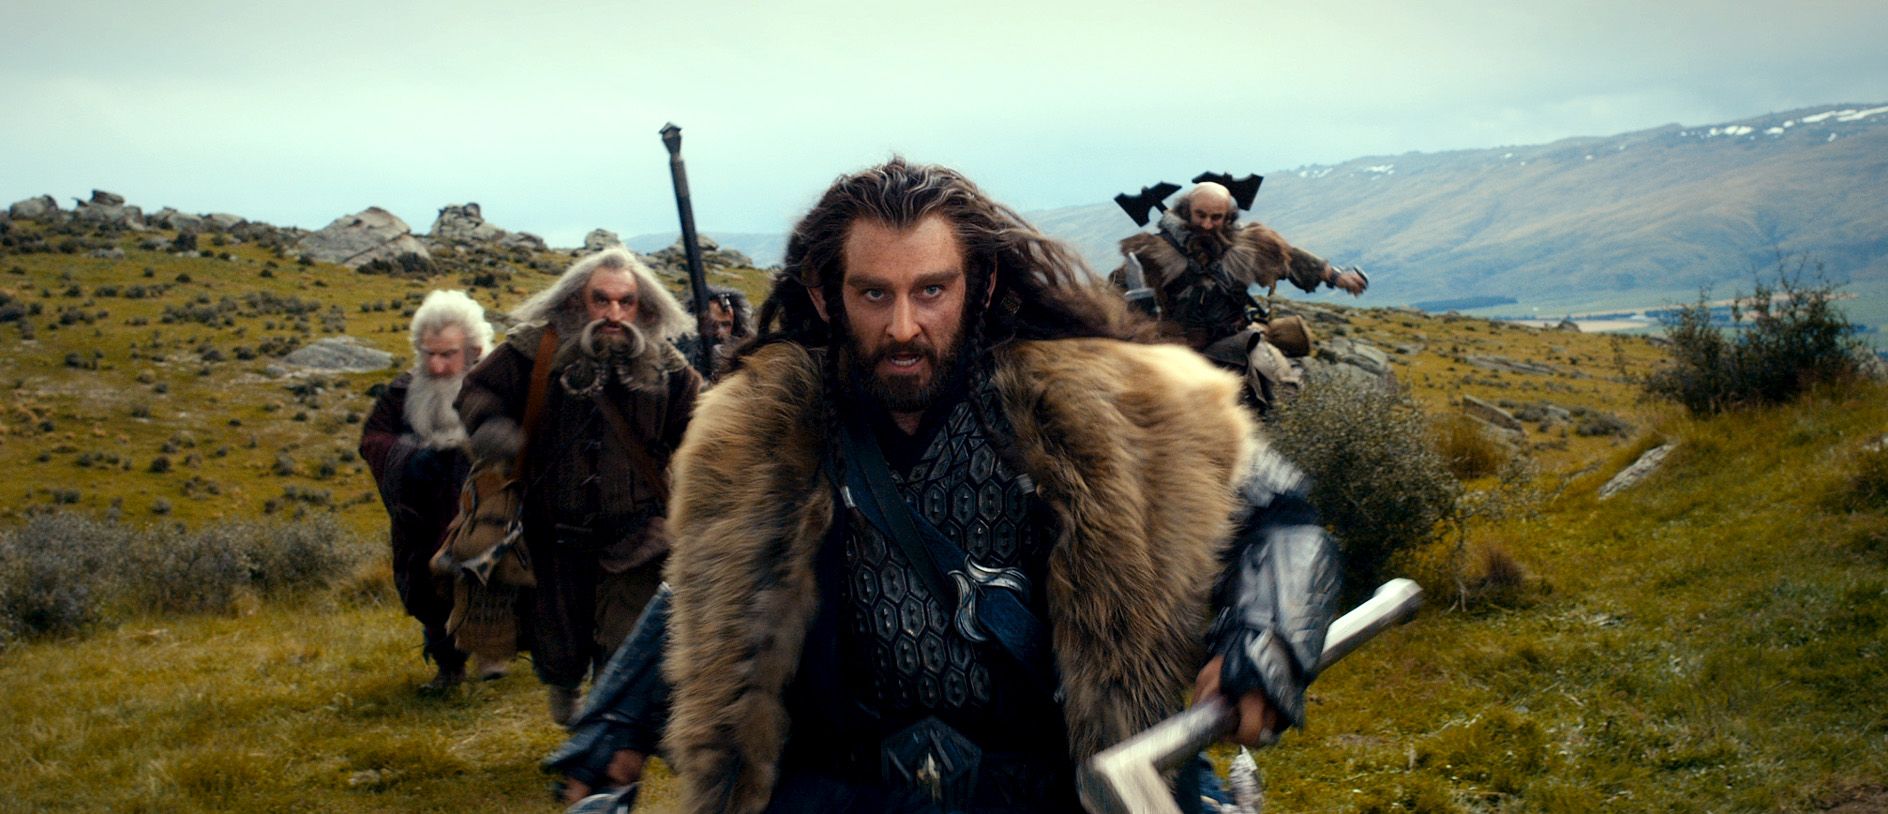 The Hobbit: An Unexpected Journey Photo #6